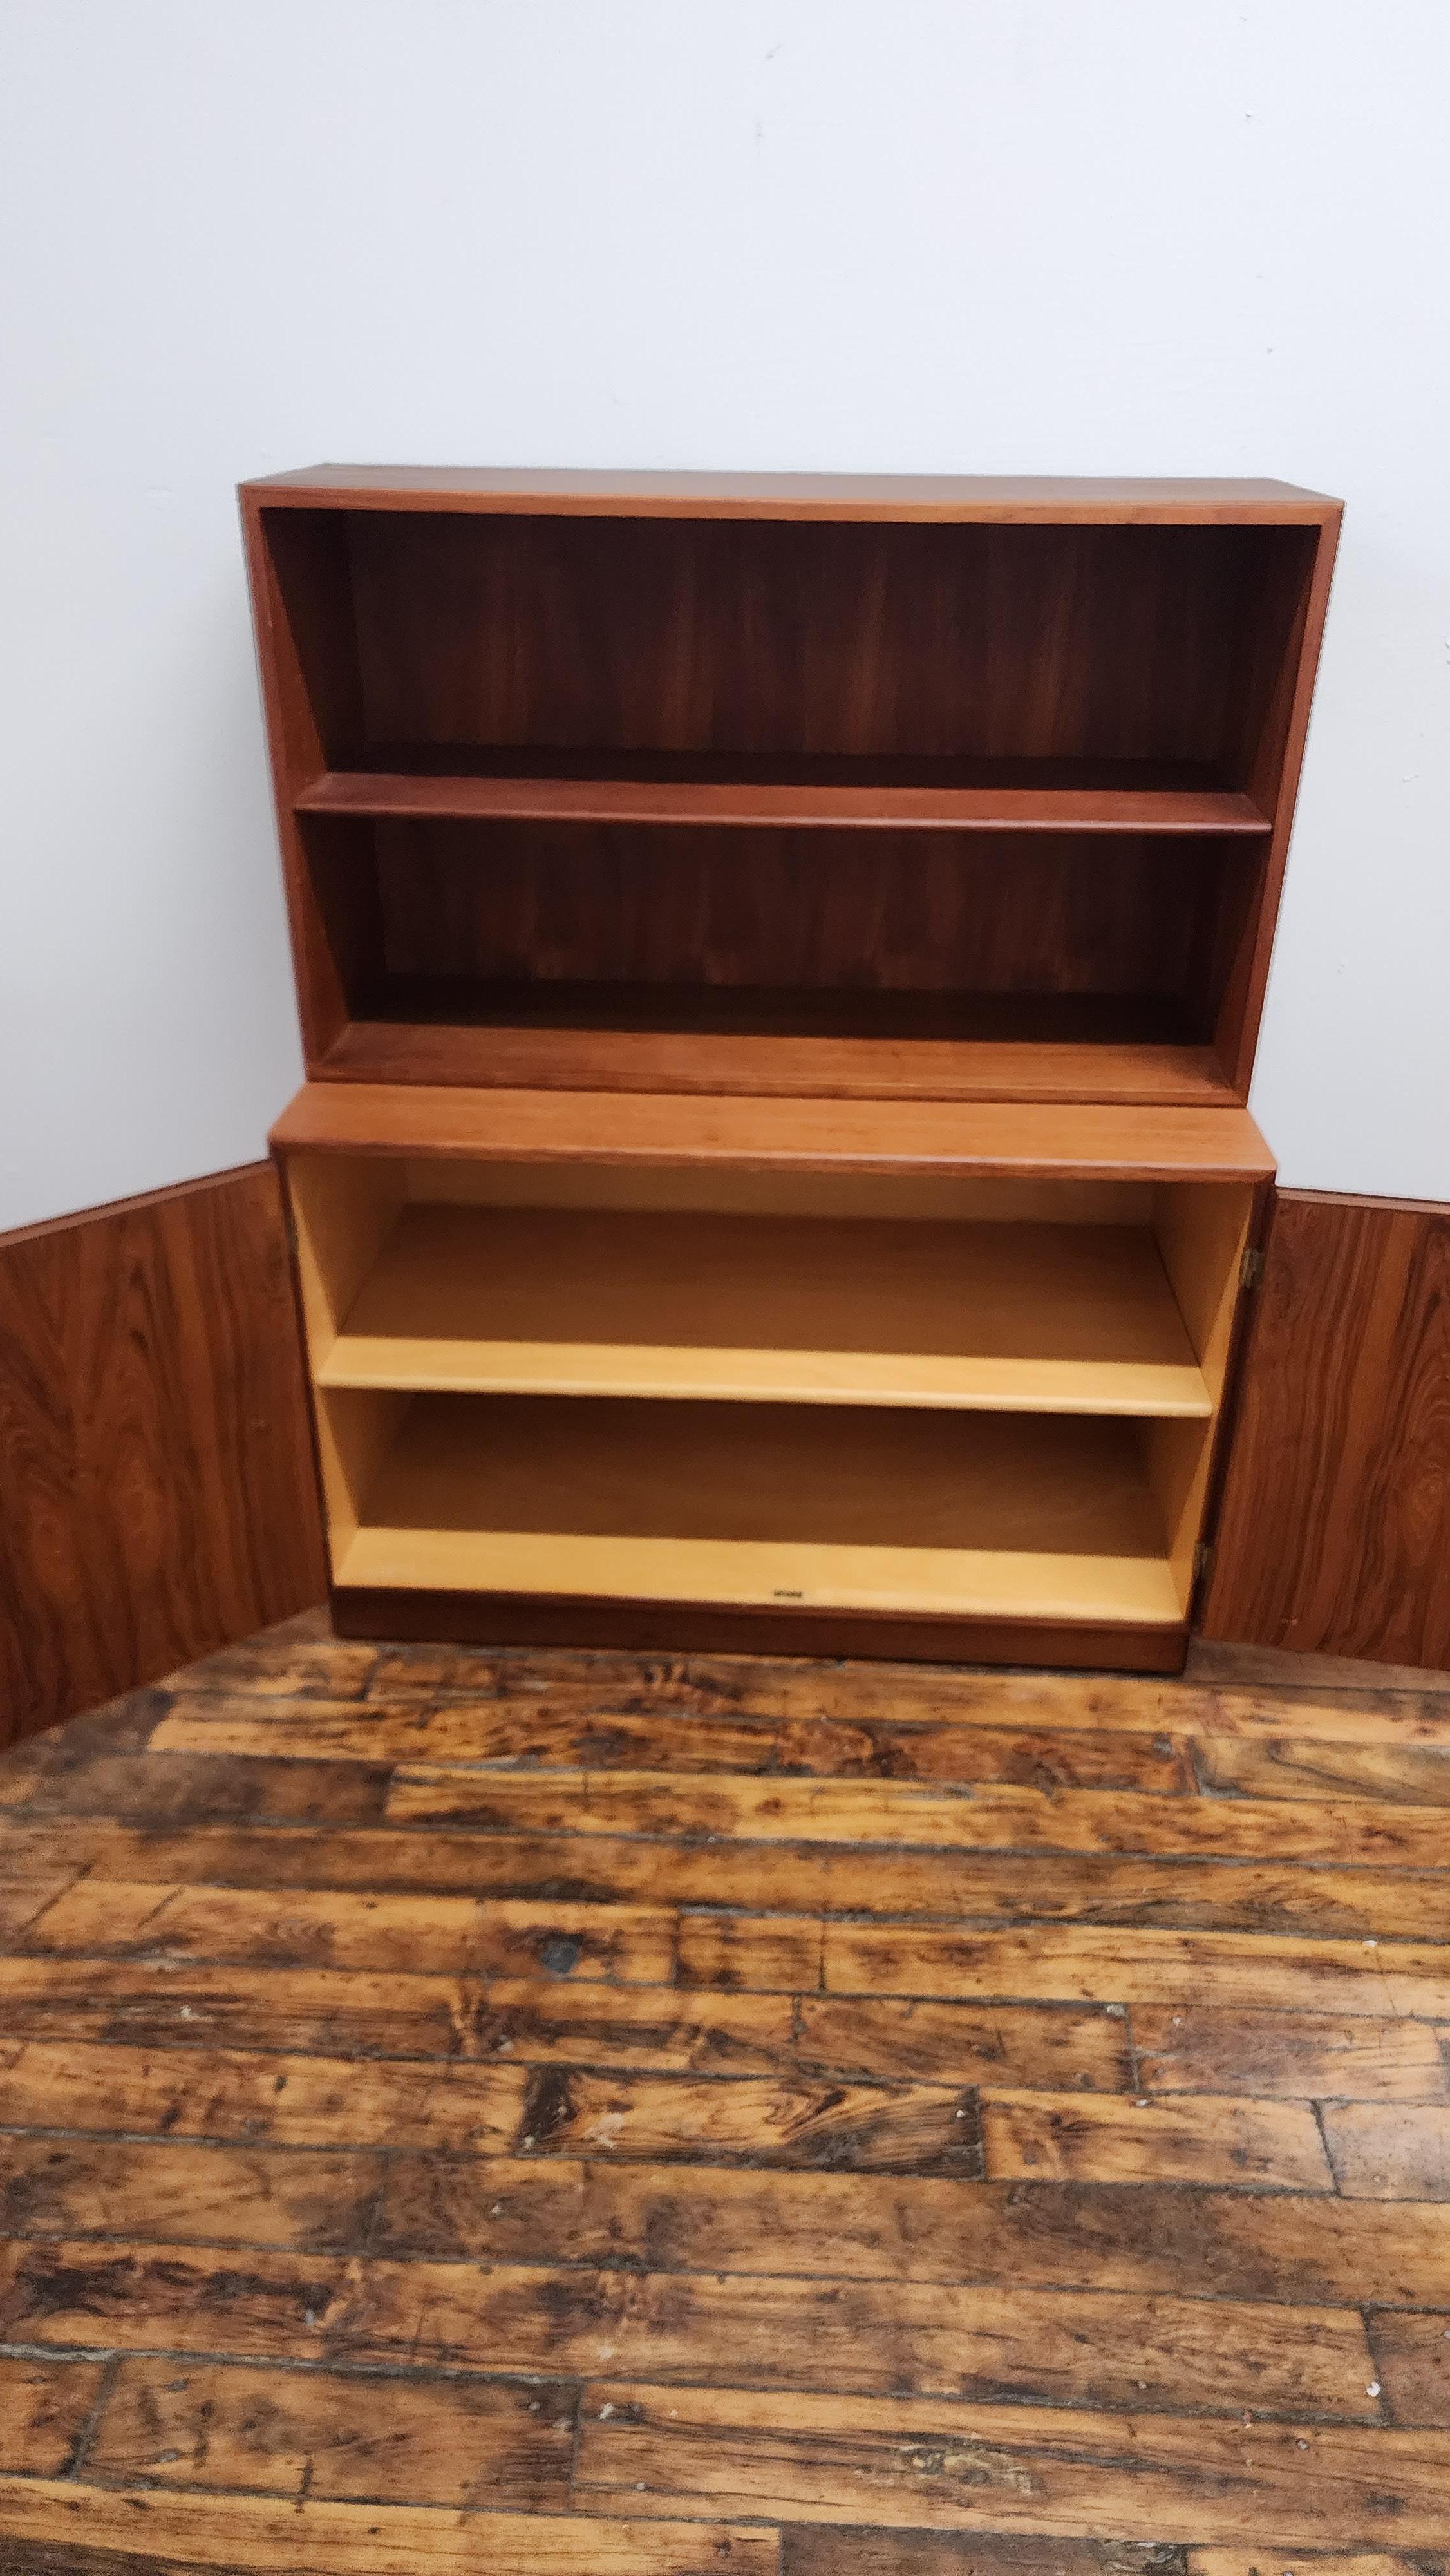 Borge Mogensen for Soberg cabinet with bookshelf In Good Condition For Sale In Philadelphia, PA